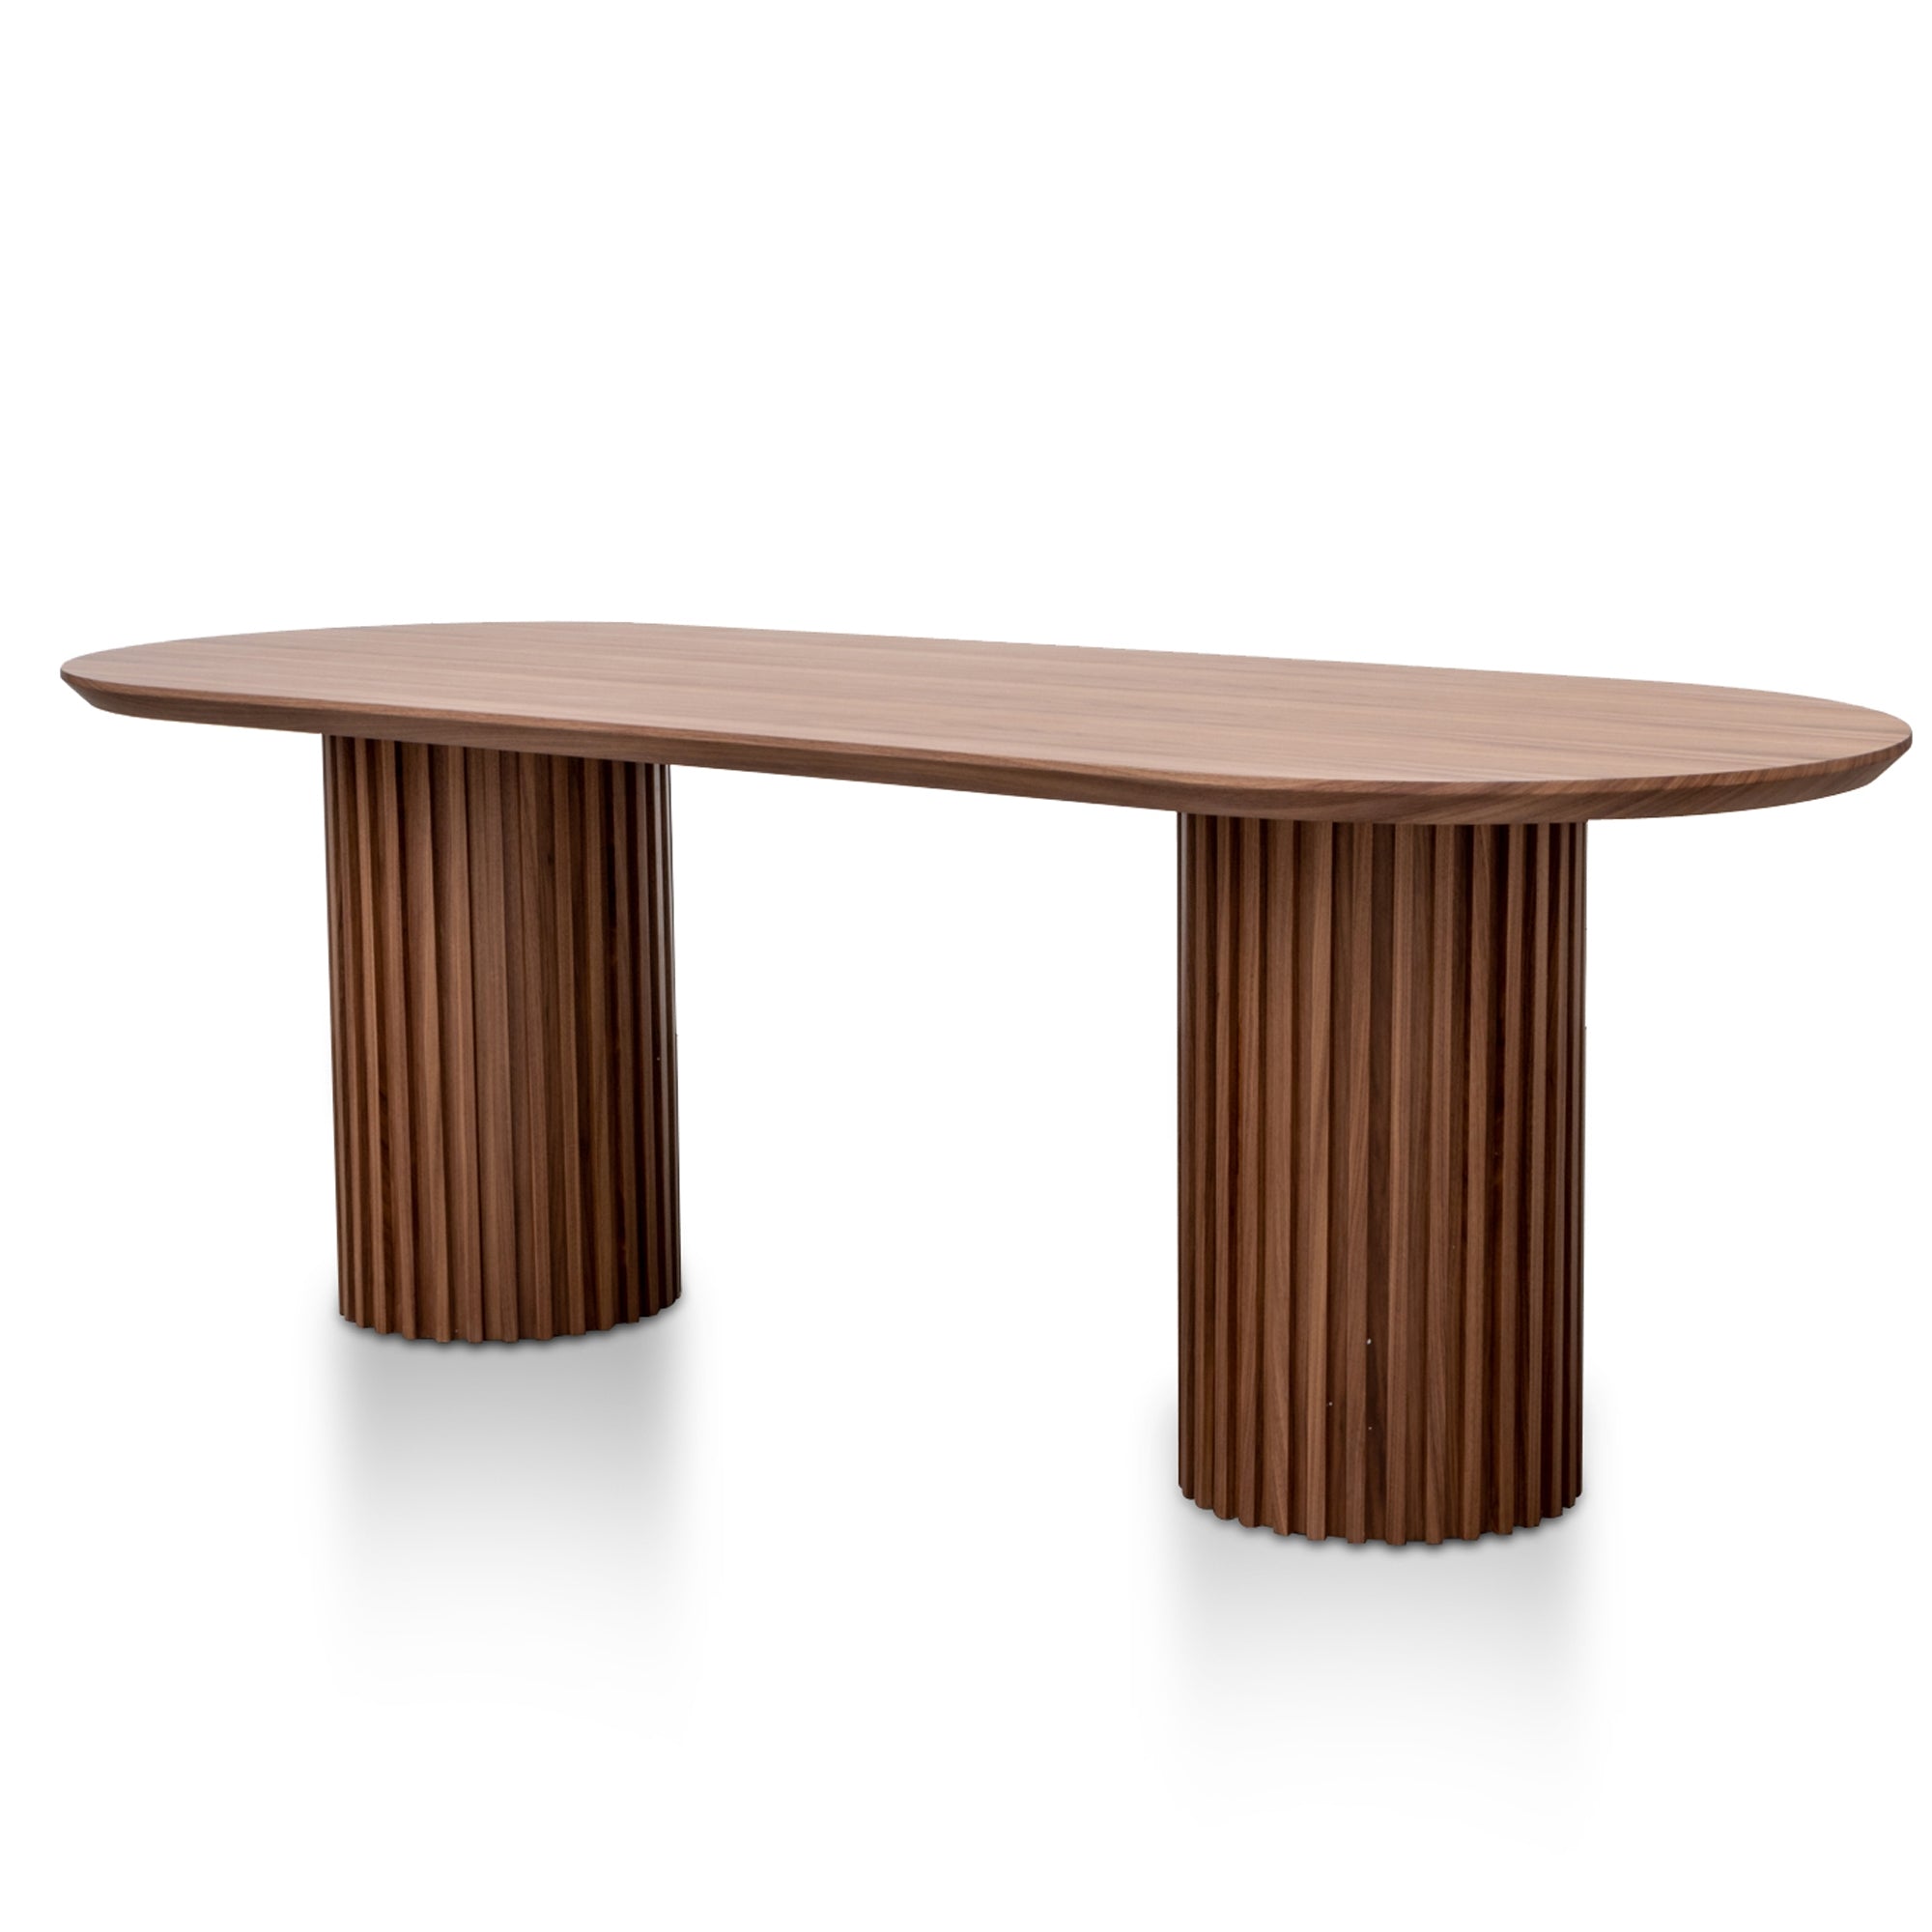 Oval Dining Table – Walnut 2.2m